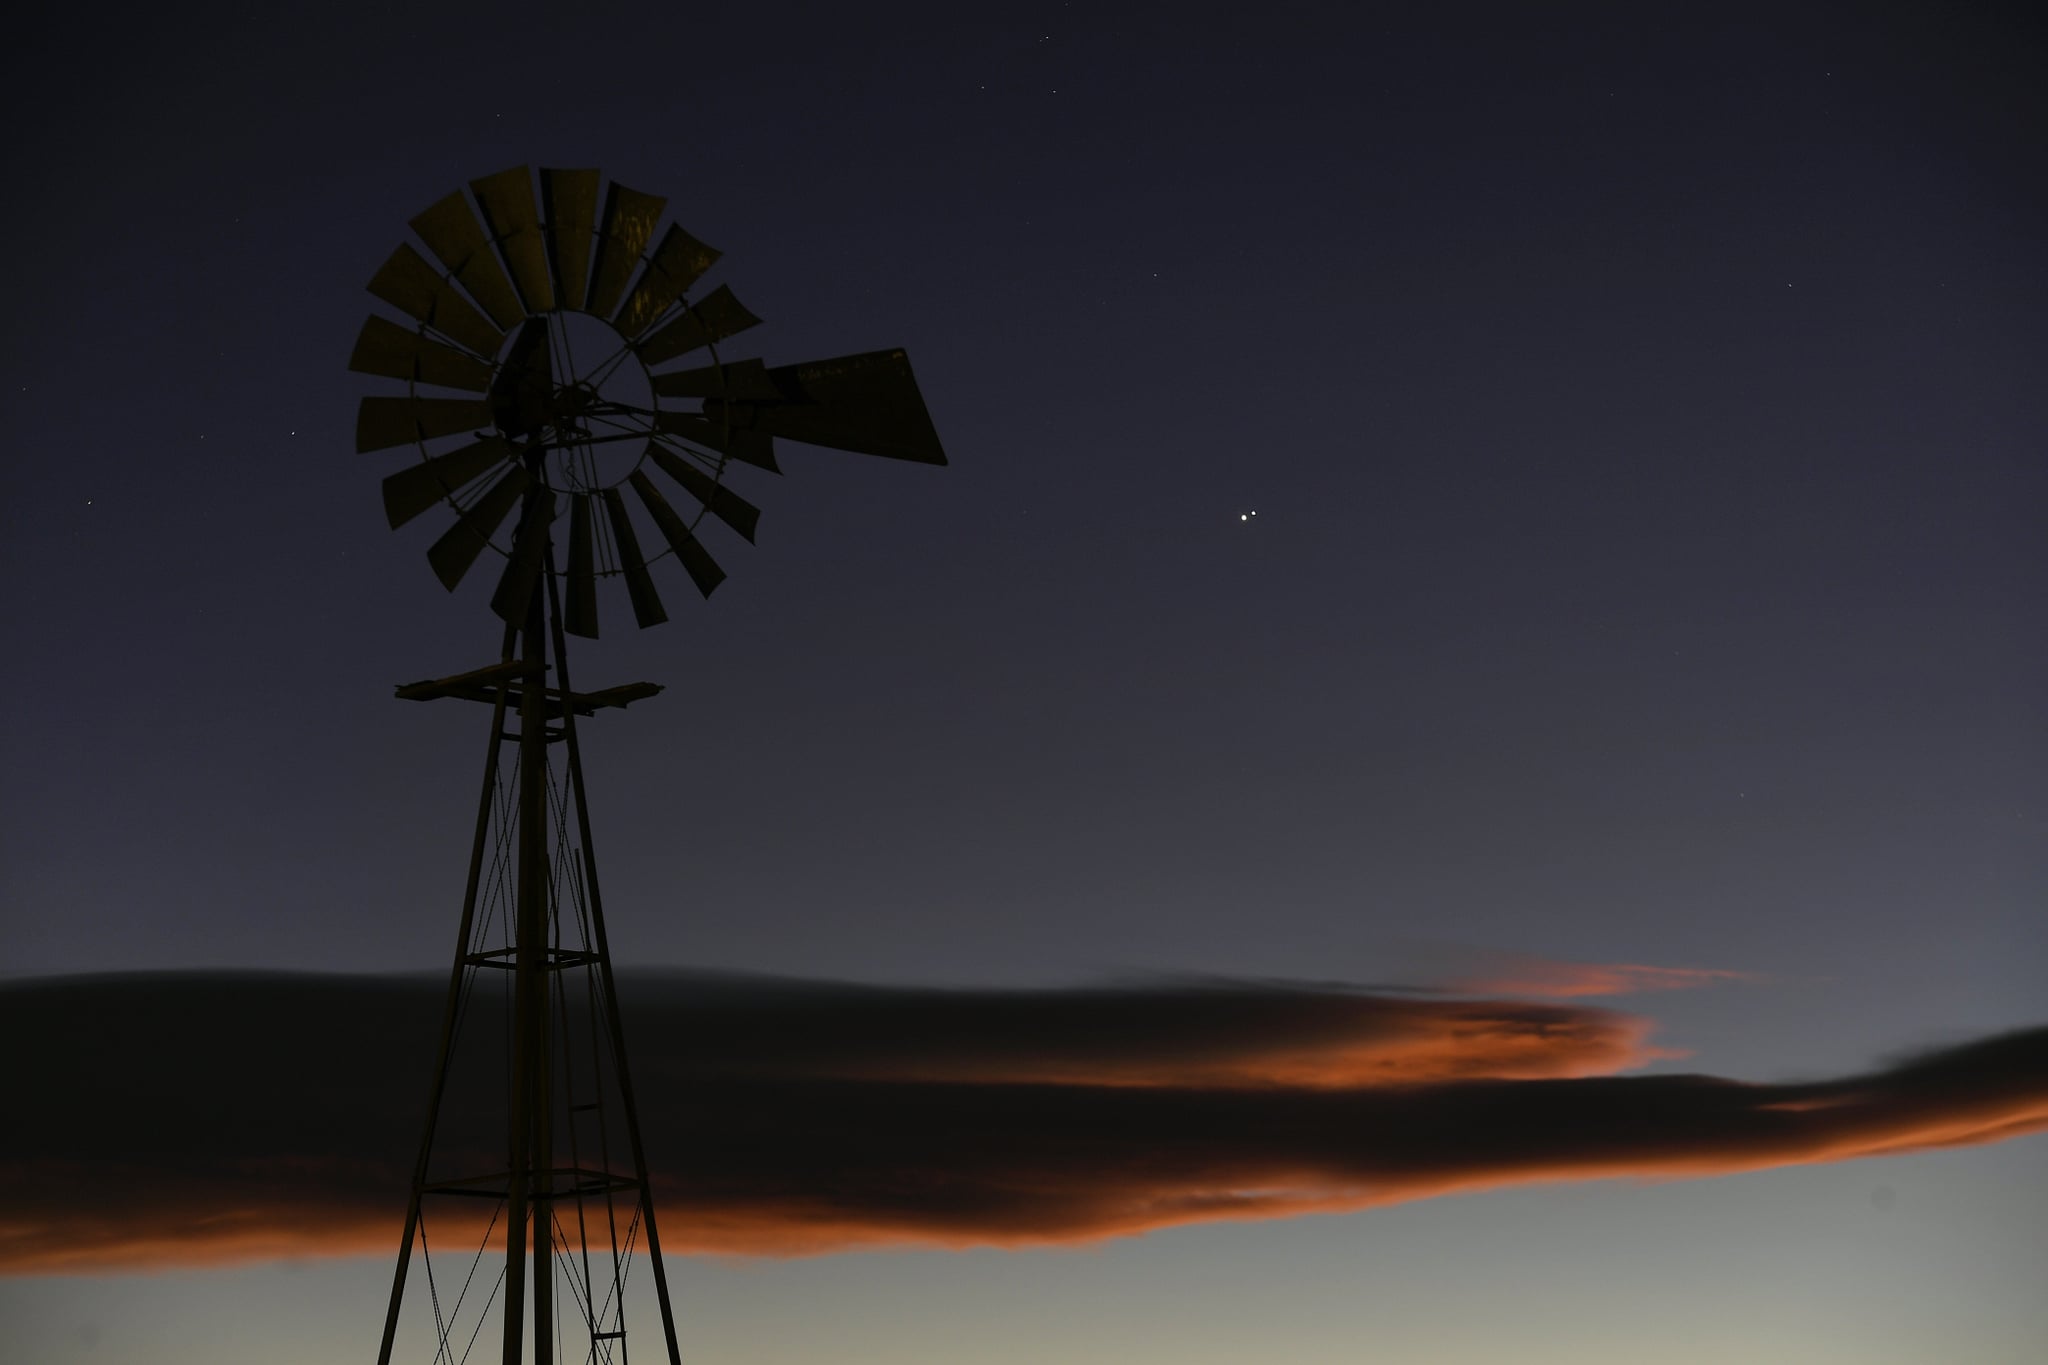 BERTHOUD, COLORADO - December 21:  Framed by a large windmill Jupiter and Saturn align for the first time in 800 years on December 21, 2020 in Berthoud, Colorado. Jupiter and Saturn are about to appear closer in the sky than they have in 800 years. The two planets will be so close that they will appear to be touching, separated by one-fifth the diameter of a full moon. To the eye they appear close but in space they